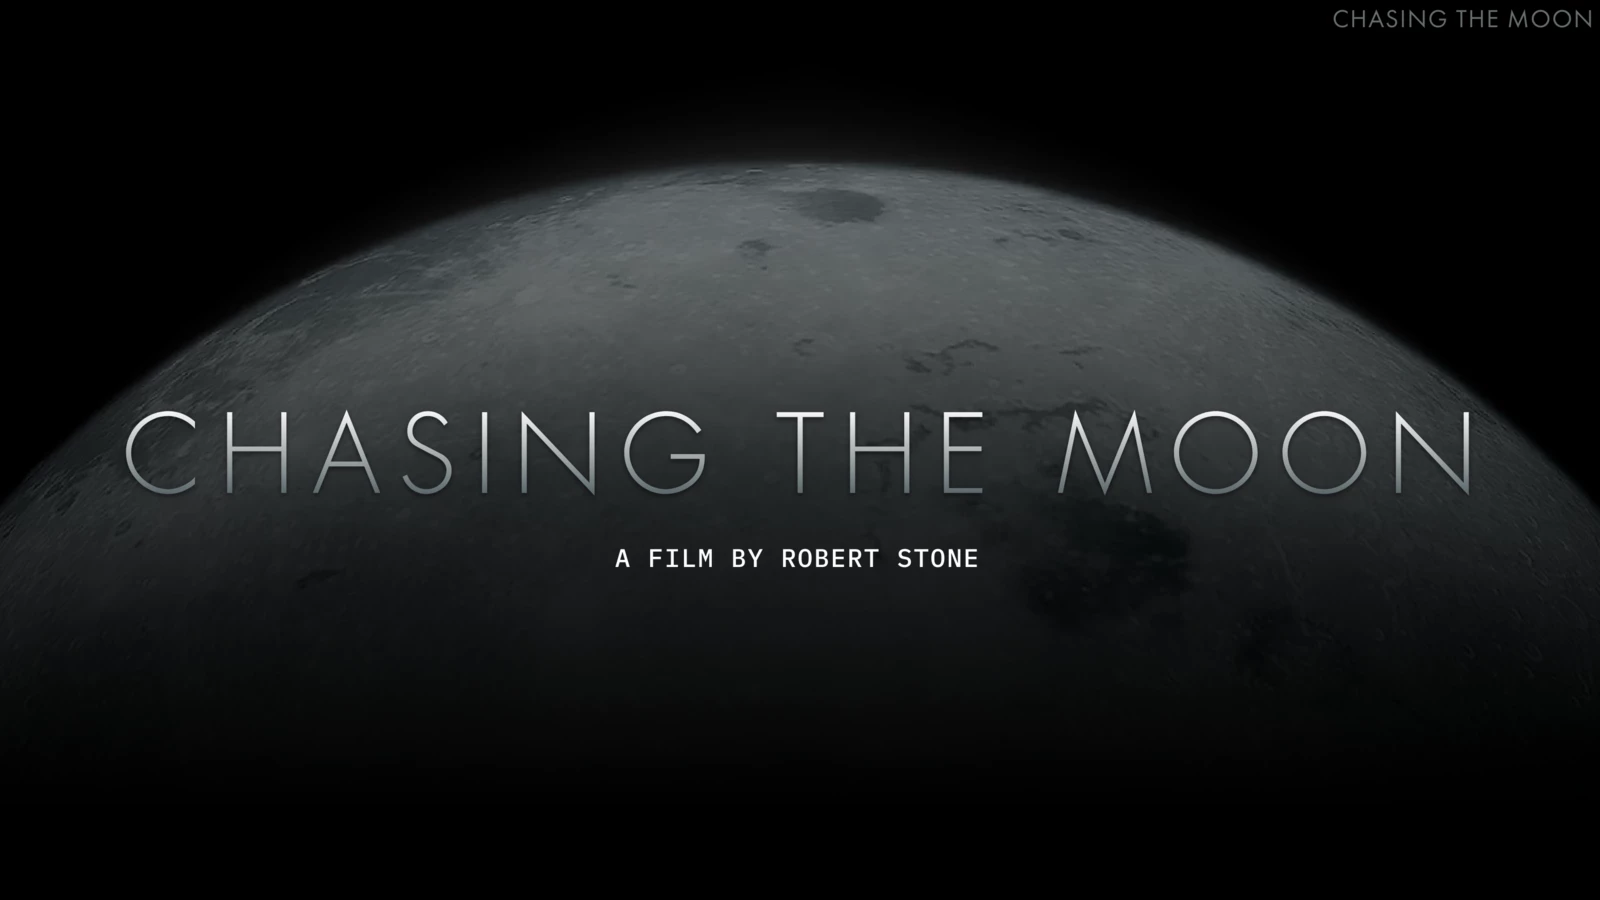 American Experience: Chasing the Moon